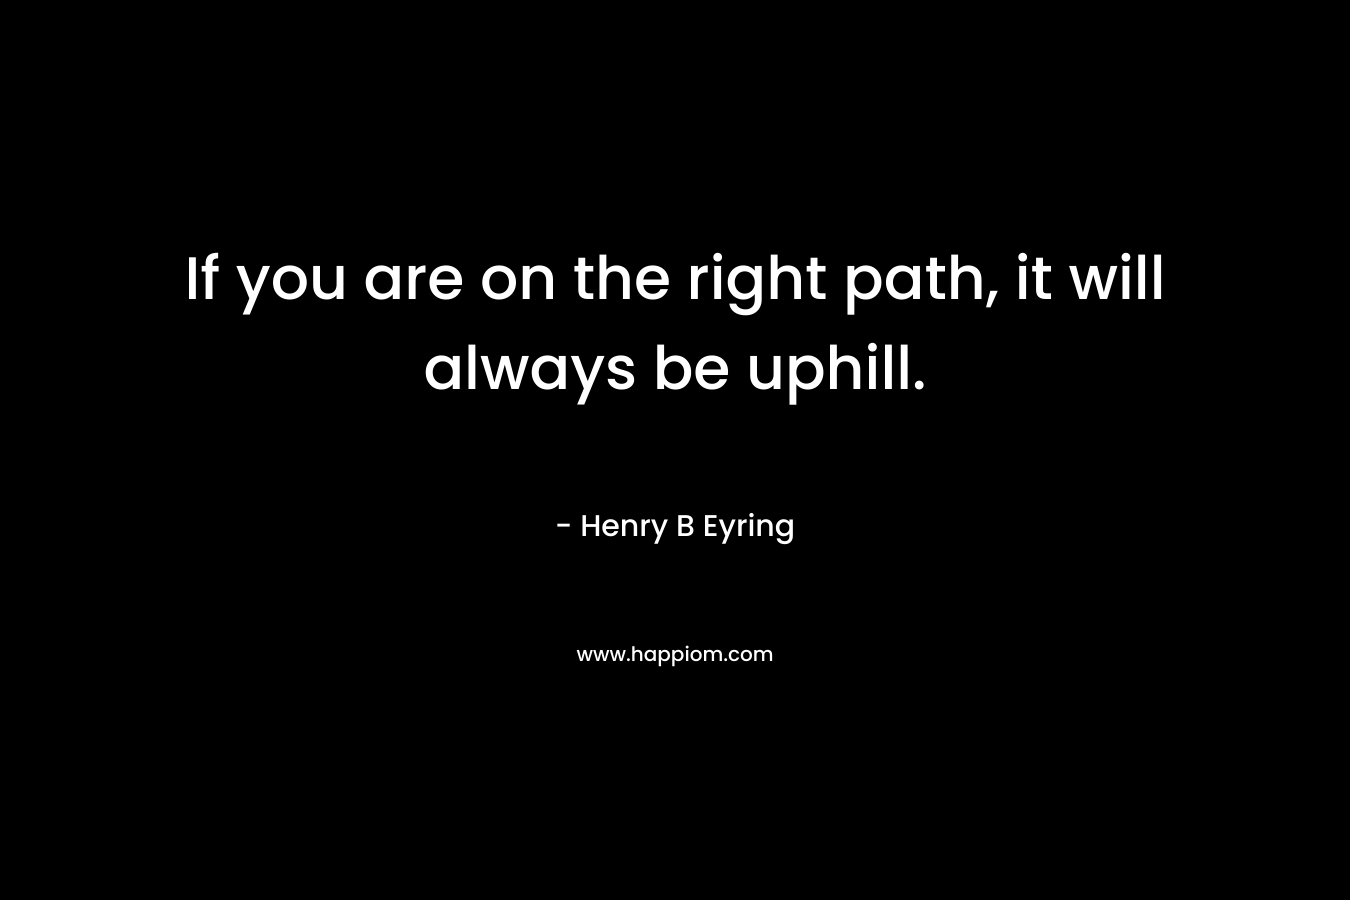 If you are on the right path, it will always be uphill. – Henry B Eyring